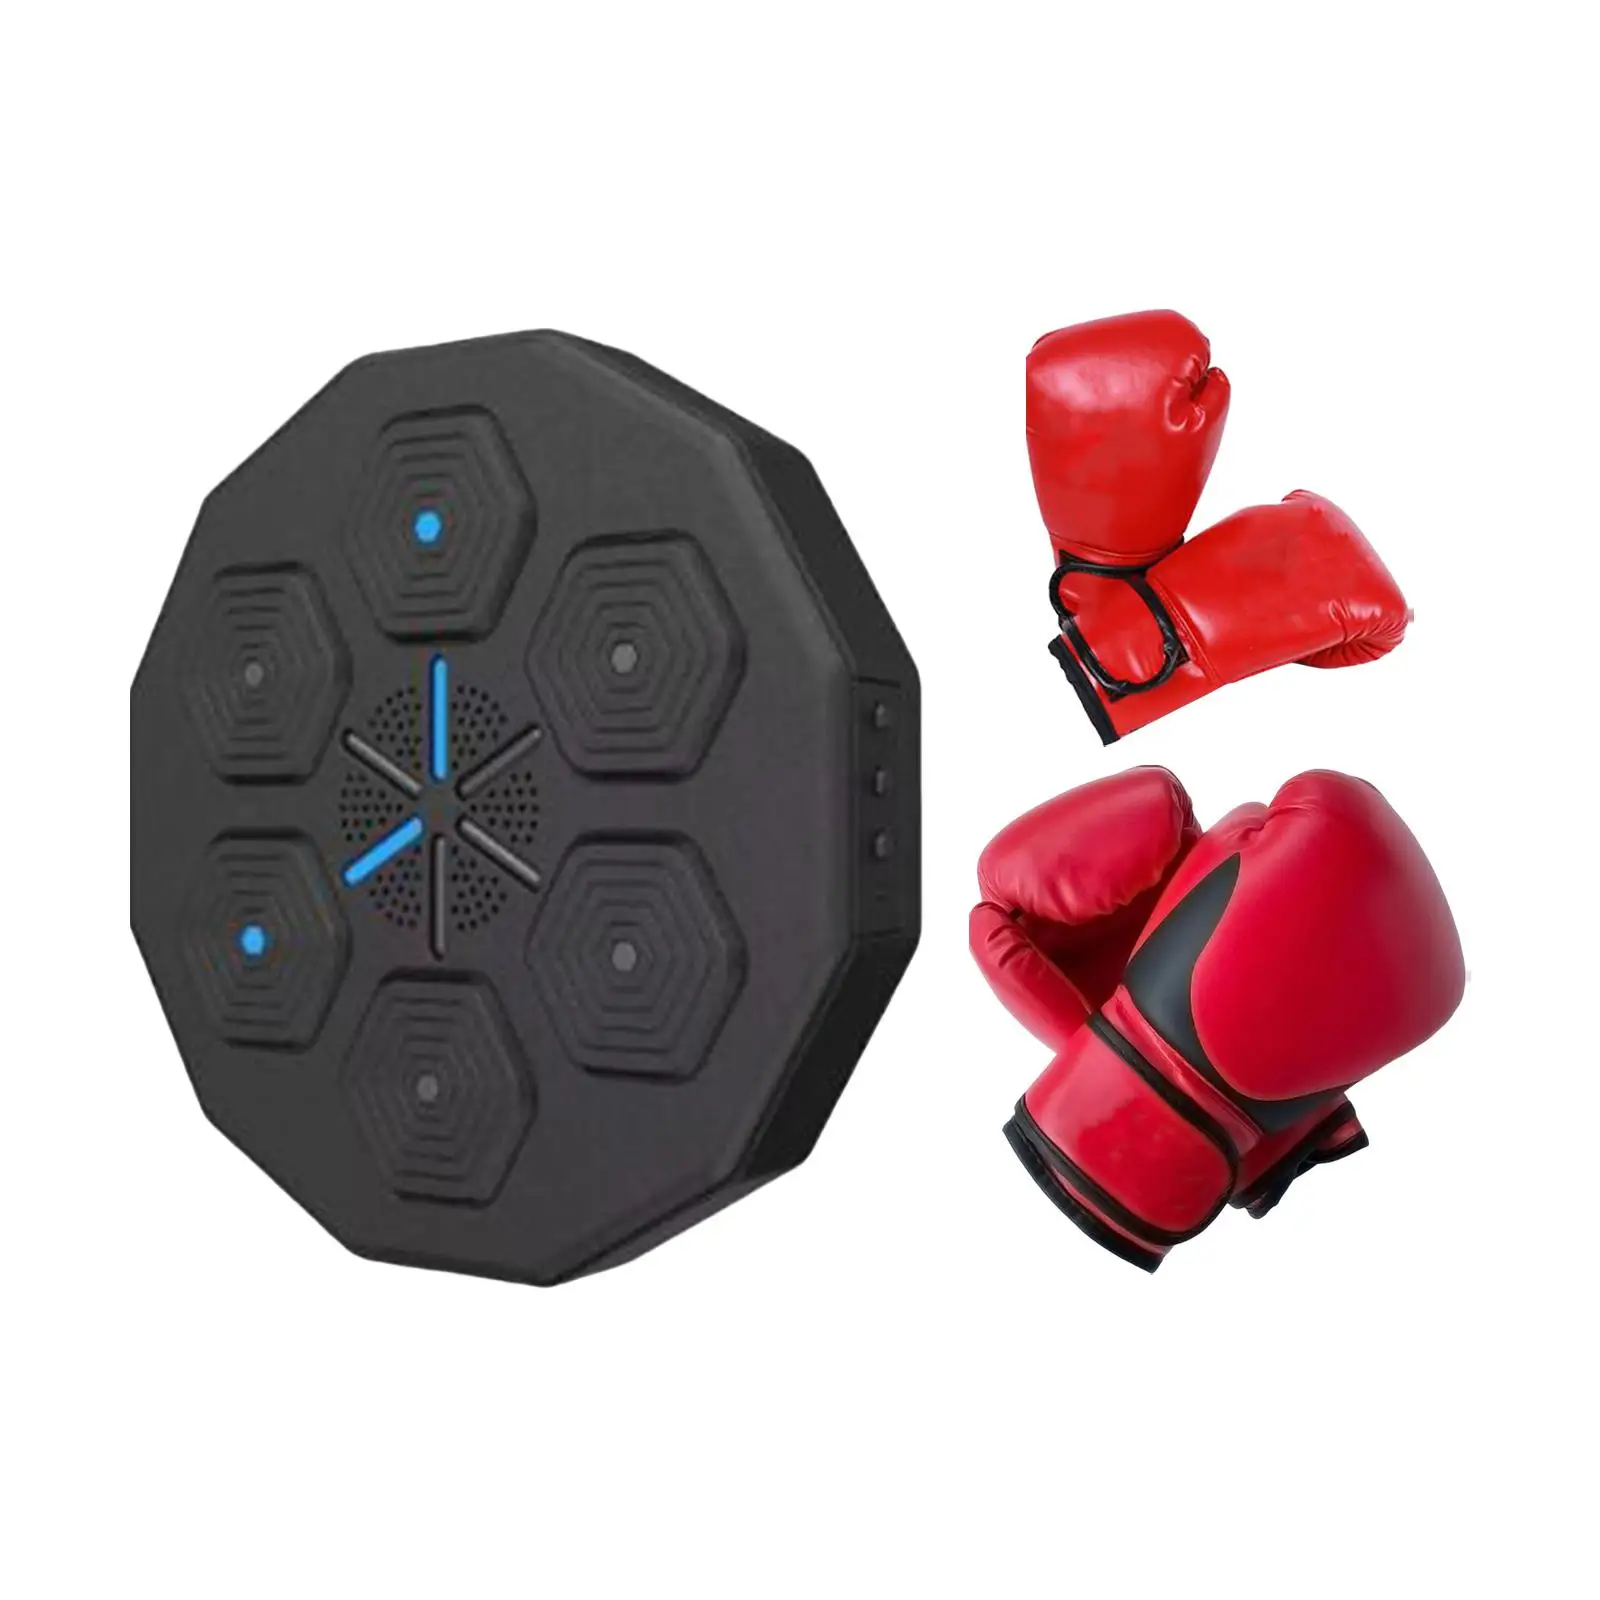 Music Boxing Wall Target Kids Adults Boxing Trainer Training Equipment with Gloves Punching Pad Boxing Machine for Exercise Home